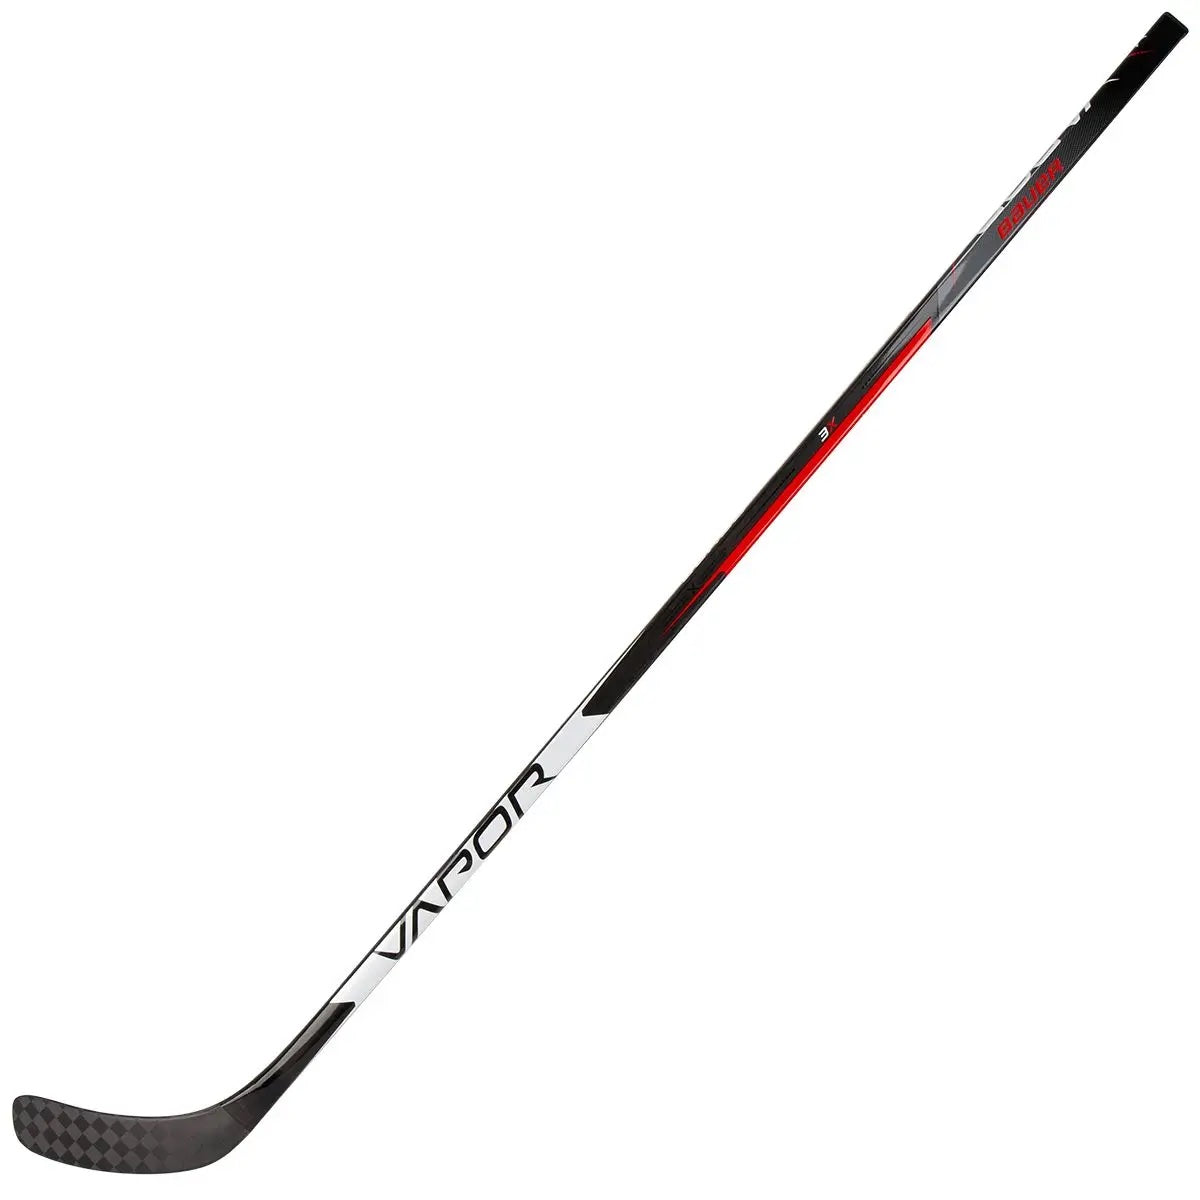 Full picture of the Bauer S21 Vapor 3X Grip Ice Hockey Stick (Junior)